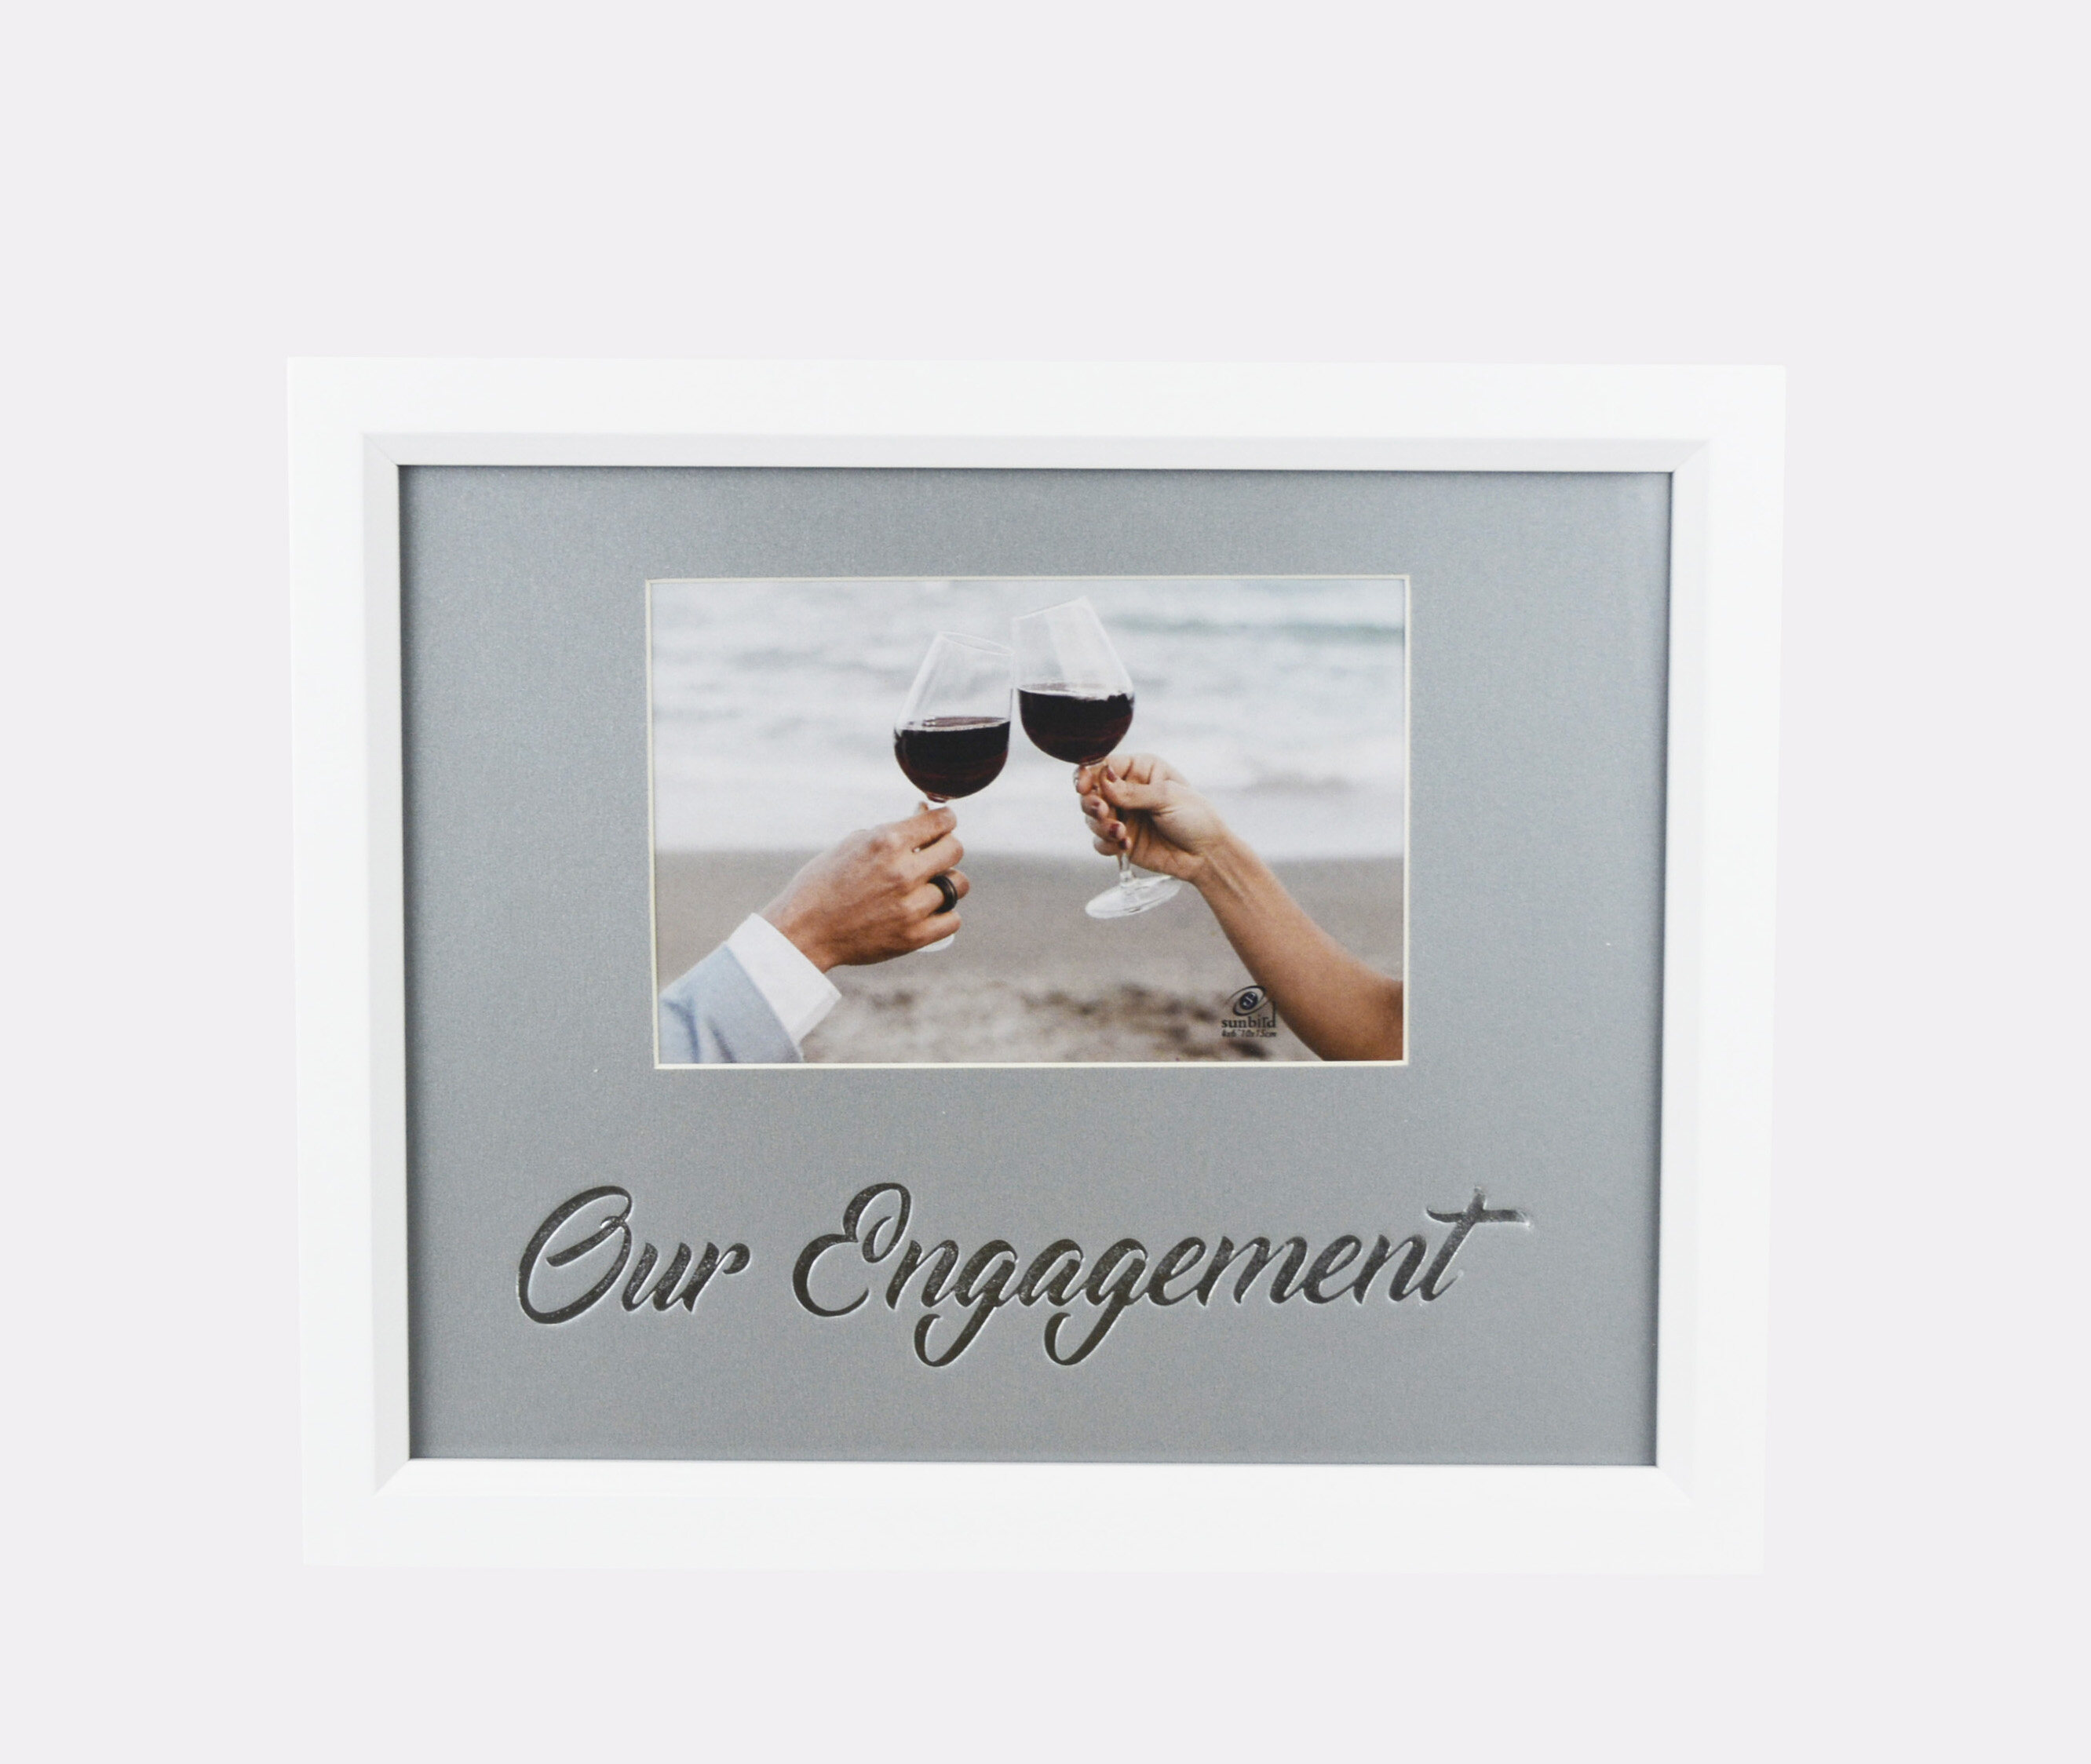 Our engagement 4x6" wooden photo frame with foil silver fonts celebrities